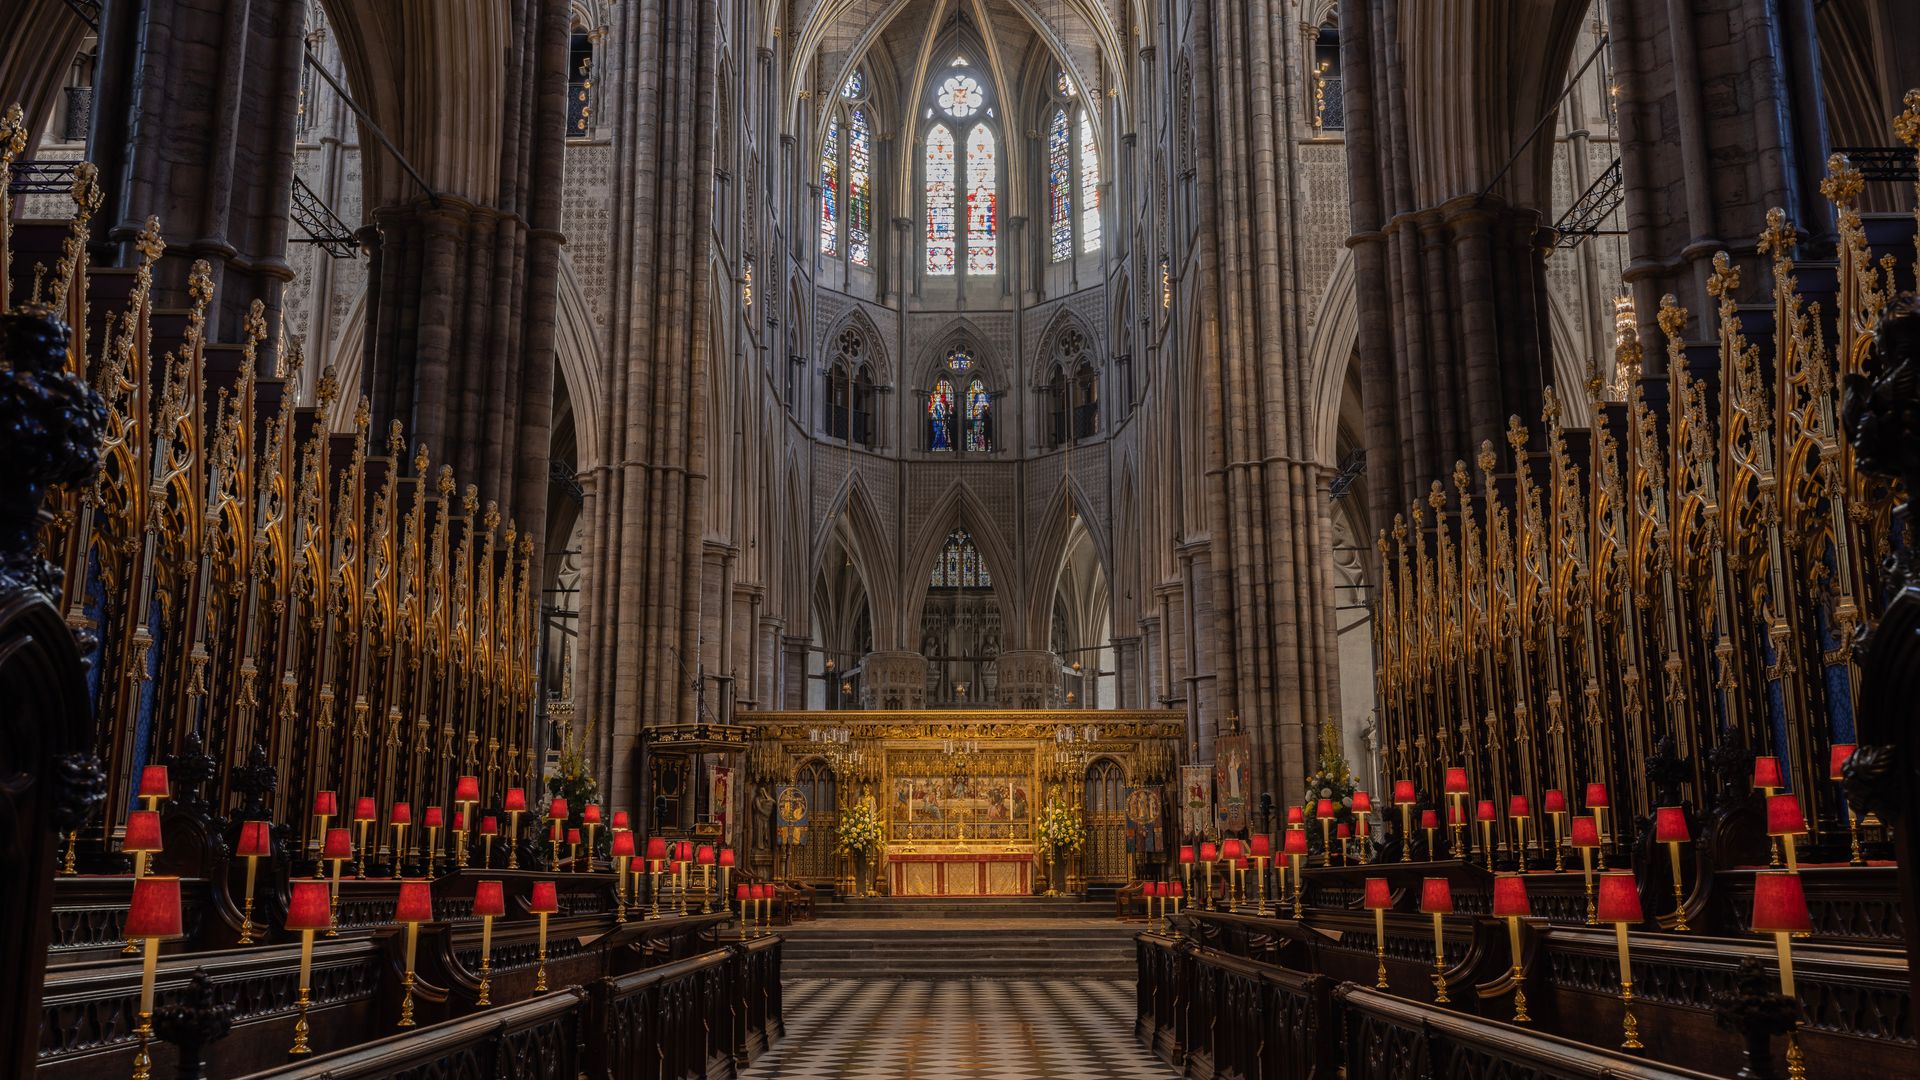 The interior of Westminster Abbey prior to King Charles III's coronation